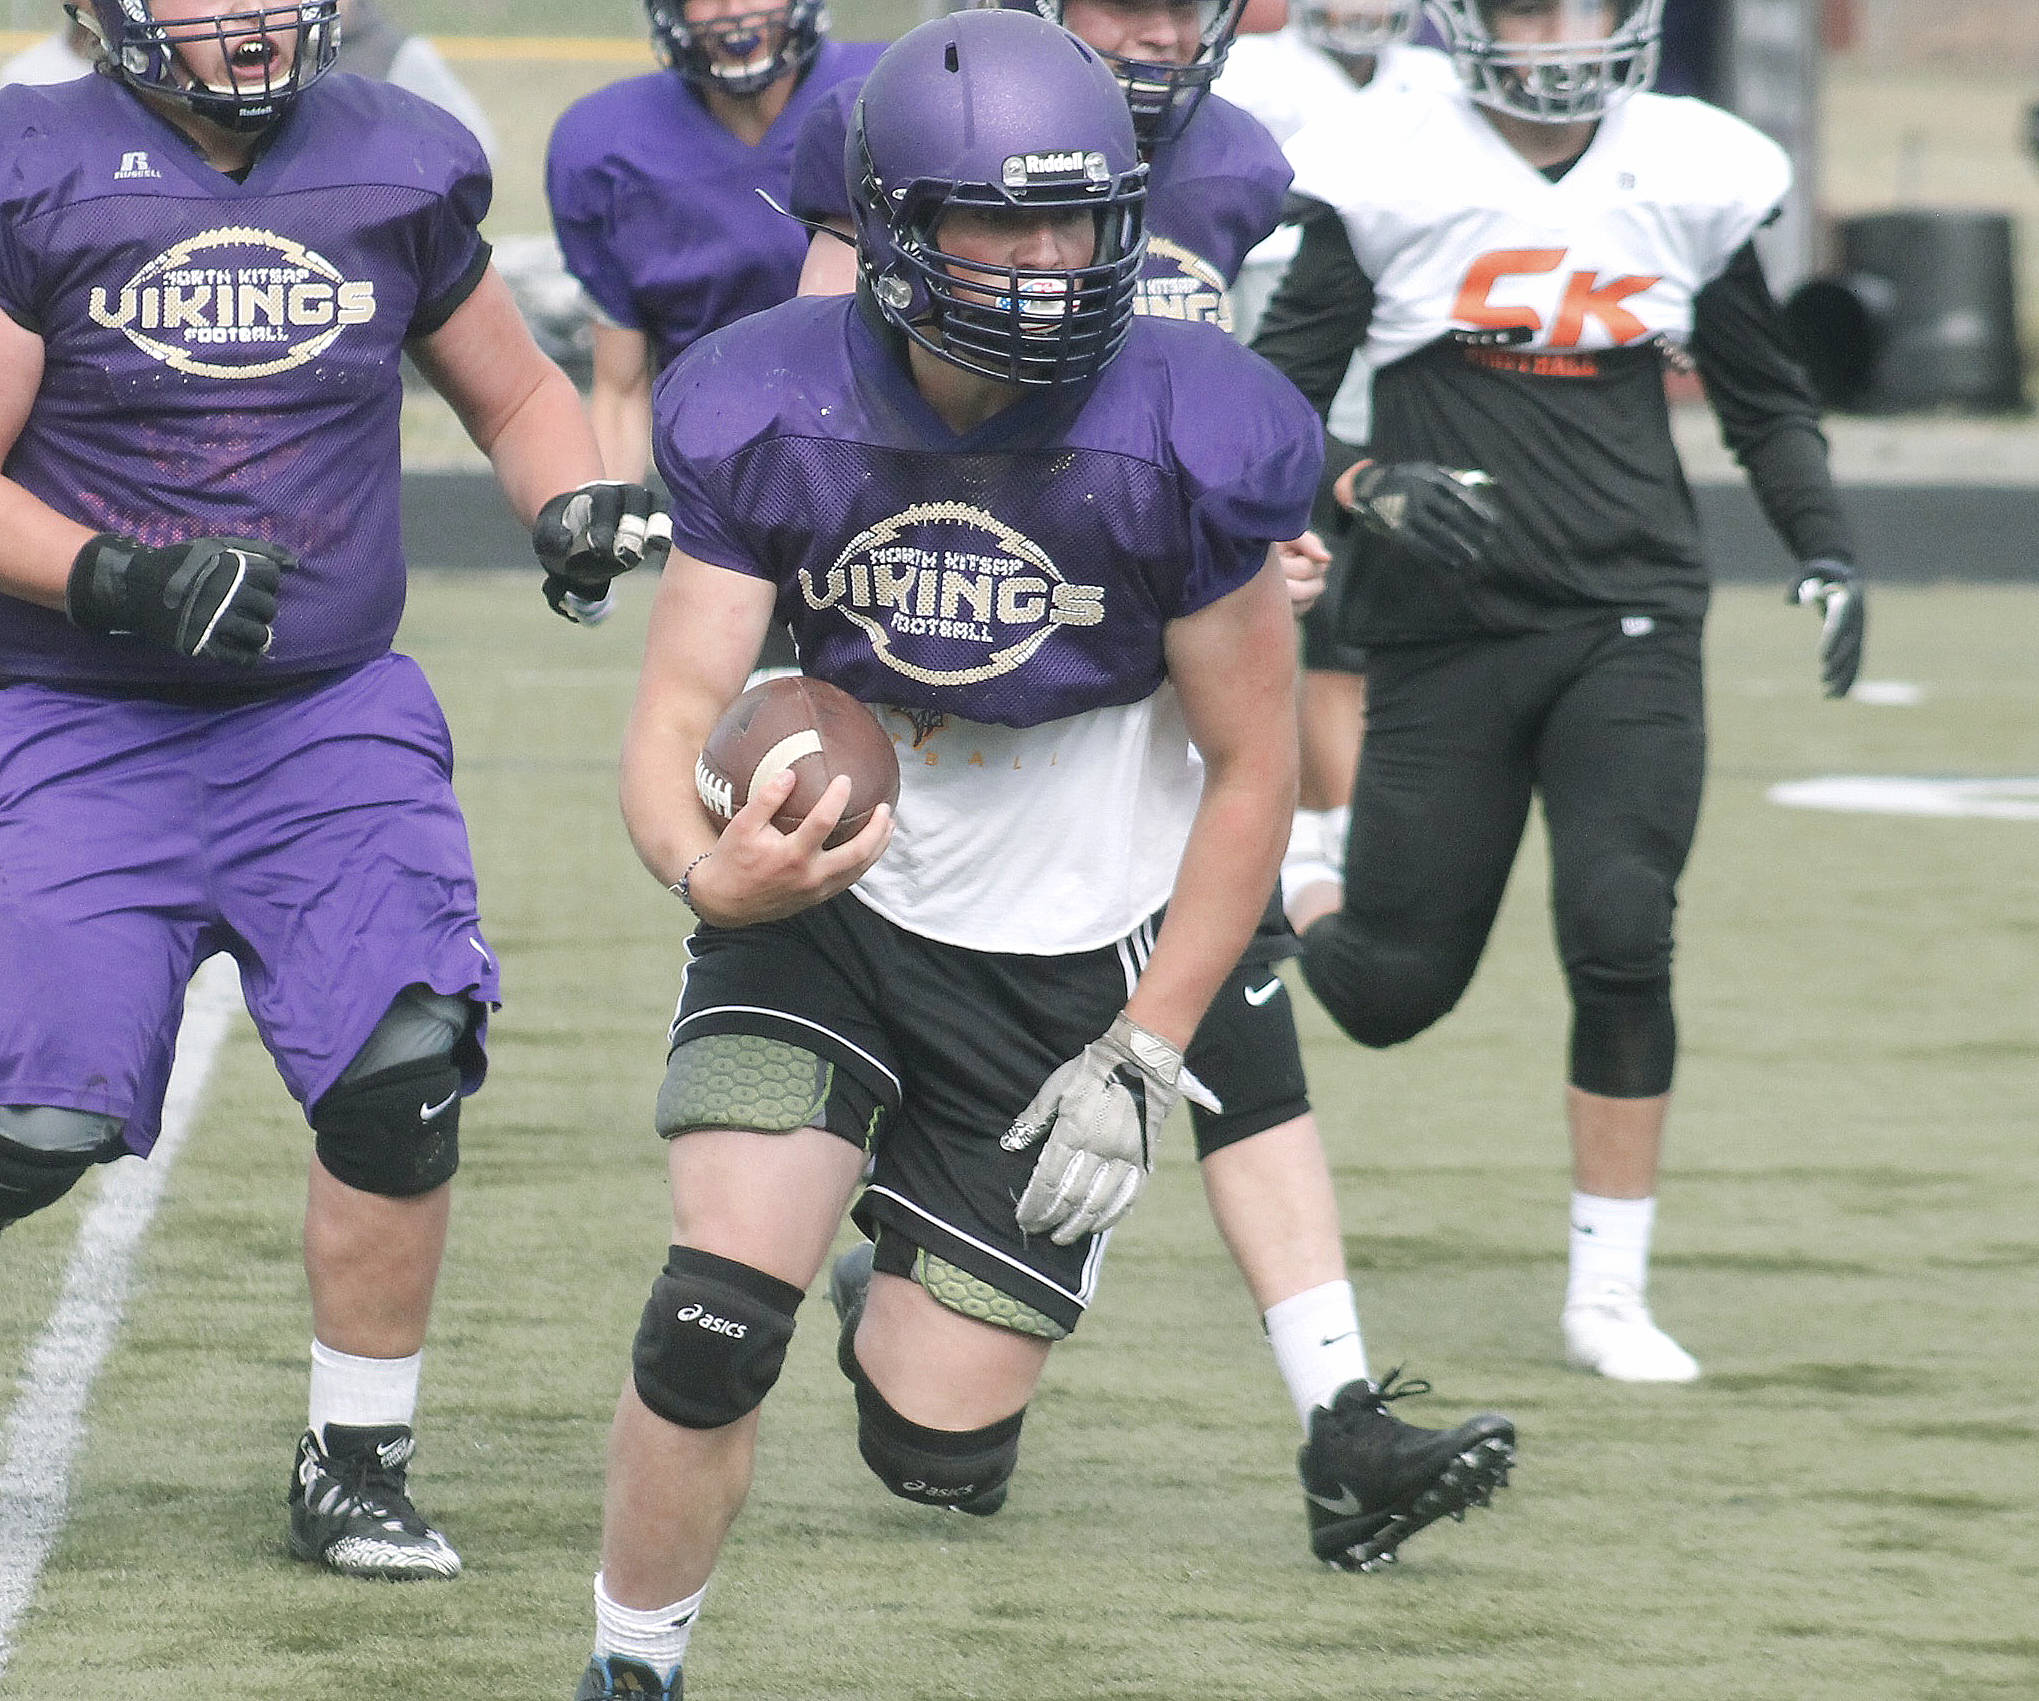 Cache Holmes carries the ball for North Kitsap at a recent scrimmage against Central Kitsap. (Mark Krulish/Kitsap News Group)